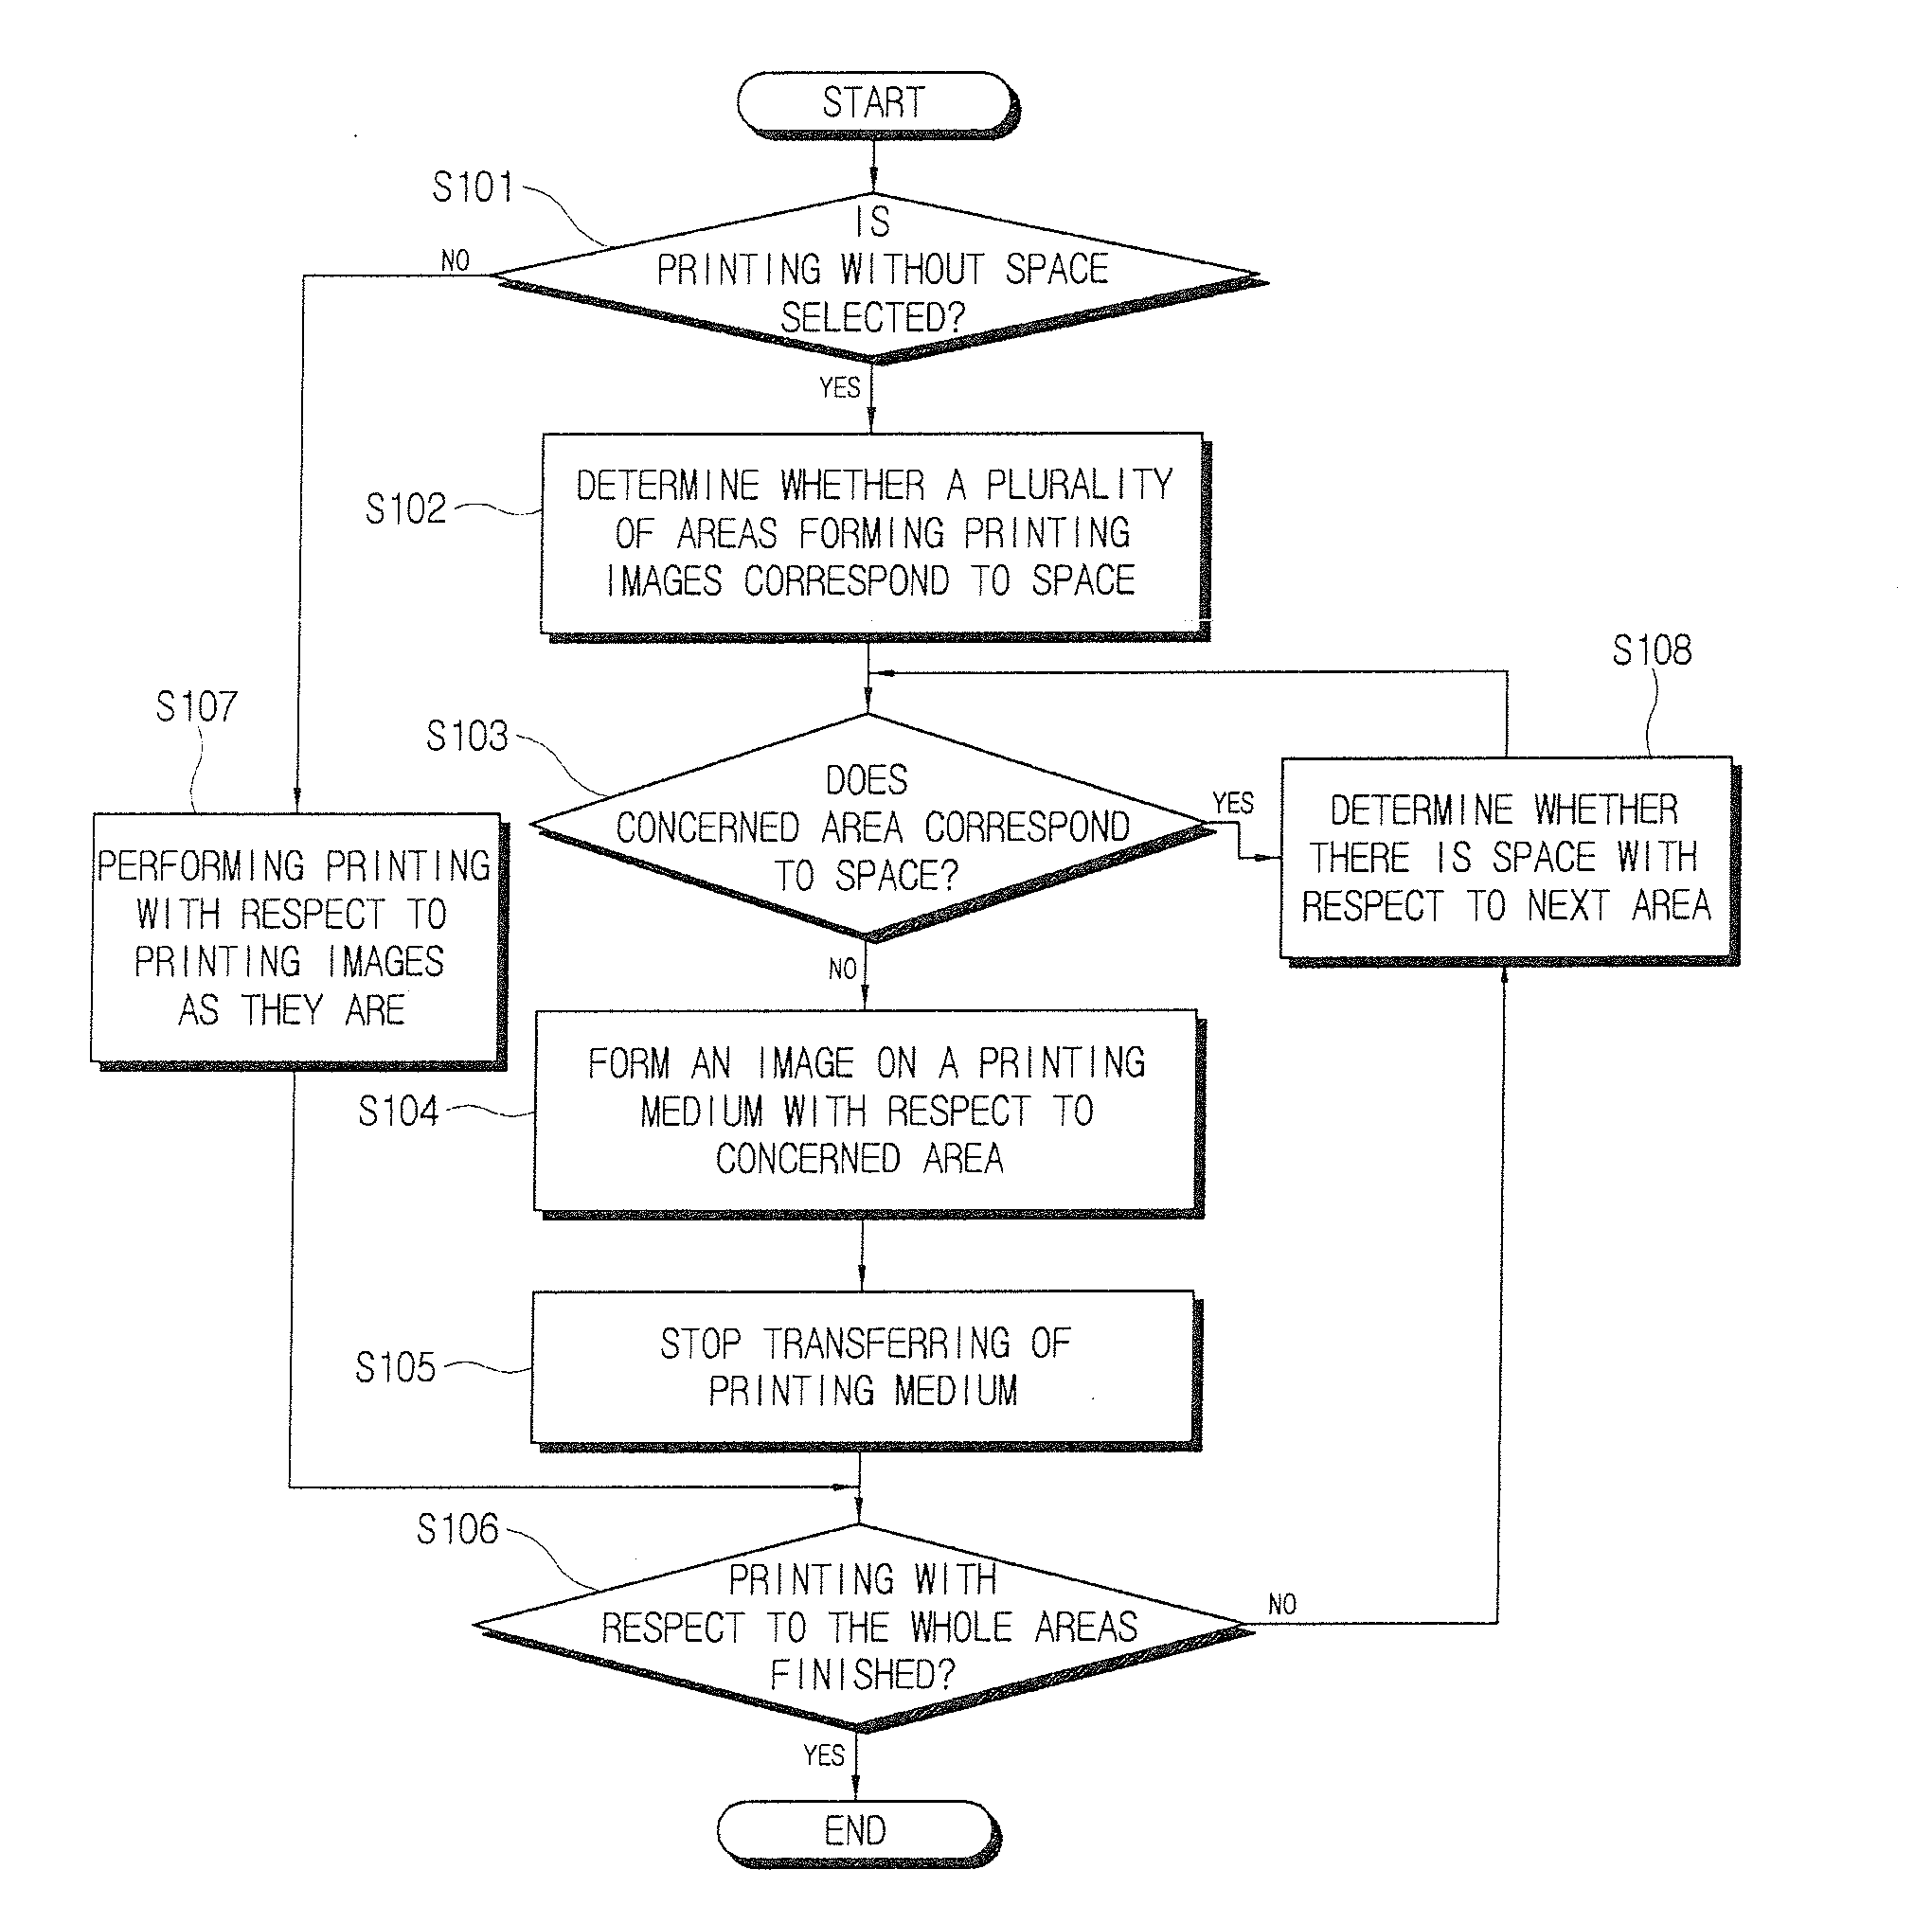 Image forming apparatus and image forming method capable of printing images without spaces therebetween